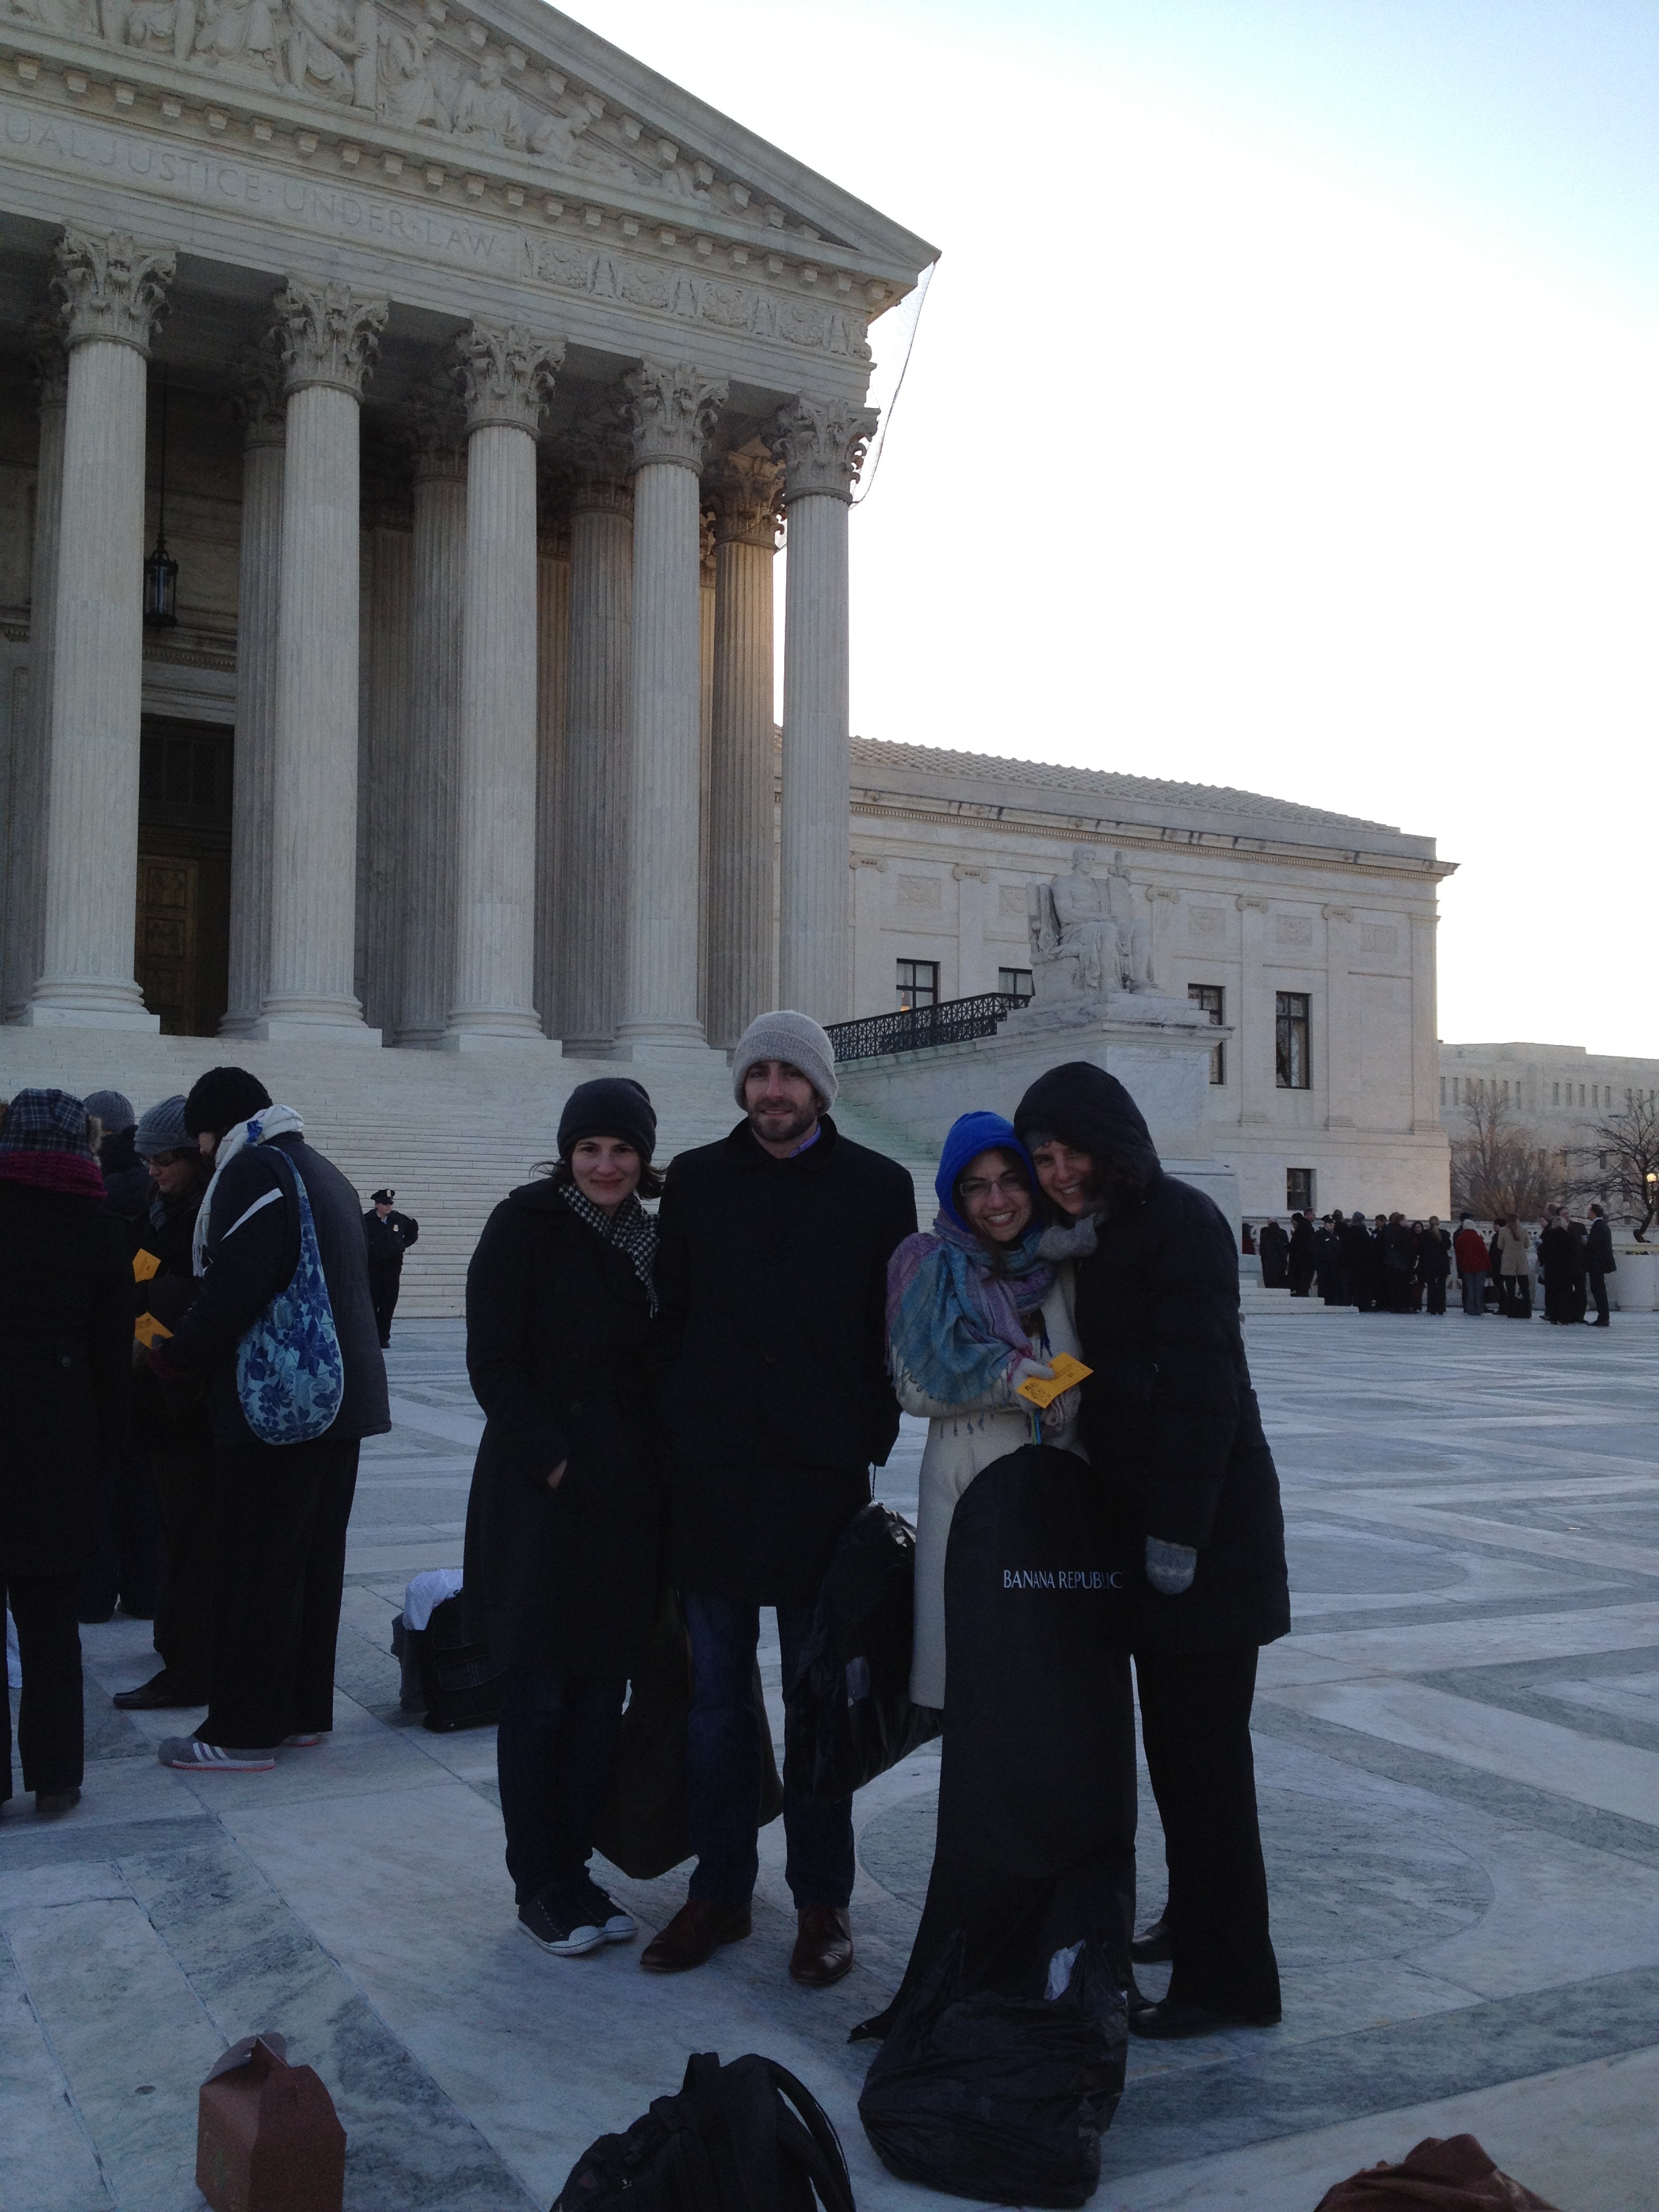 Four individuals smile outside the Supreme Court. They wear heavy coats, indicating it is winter.